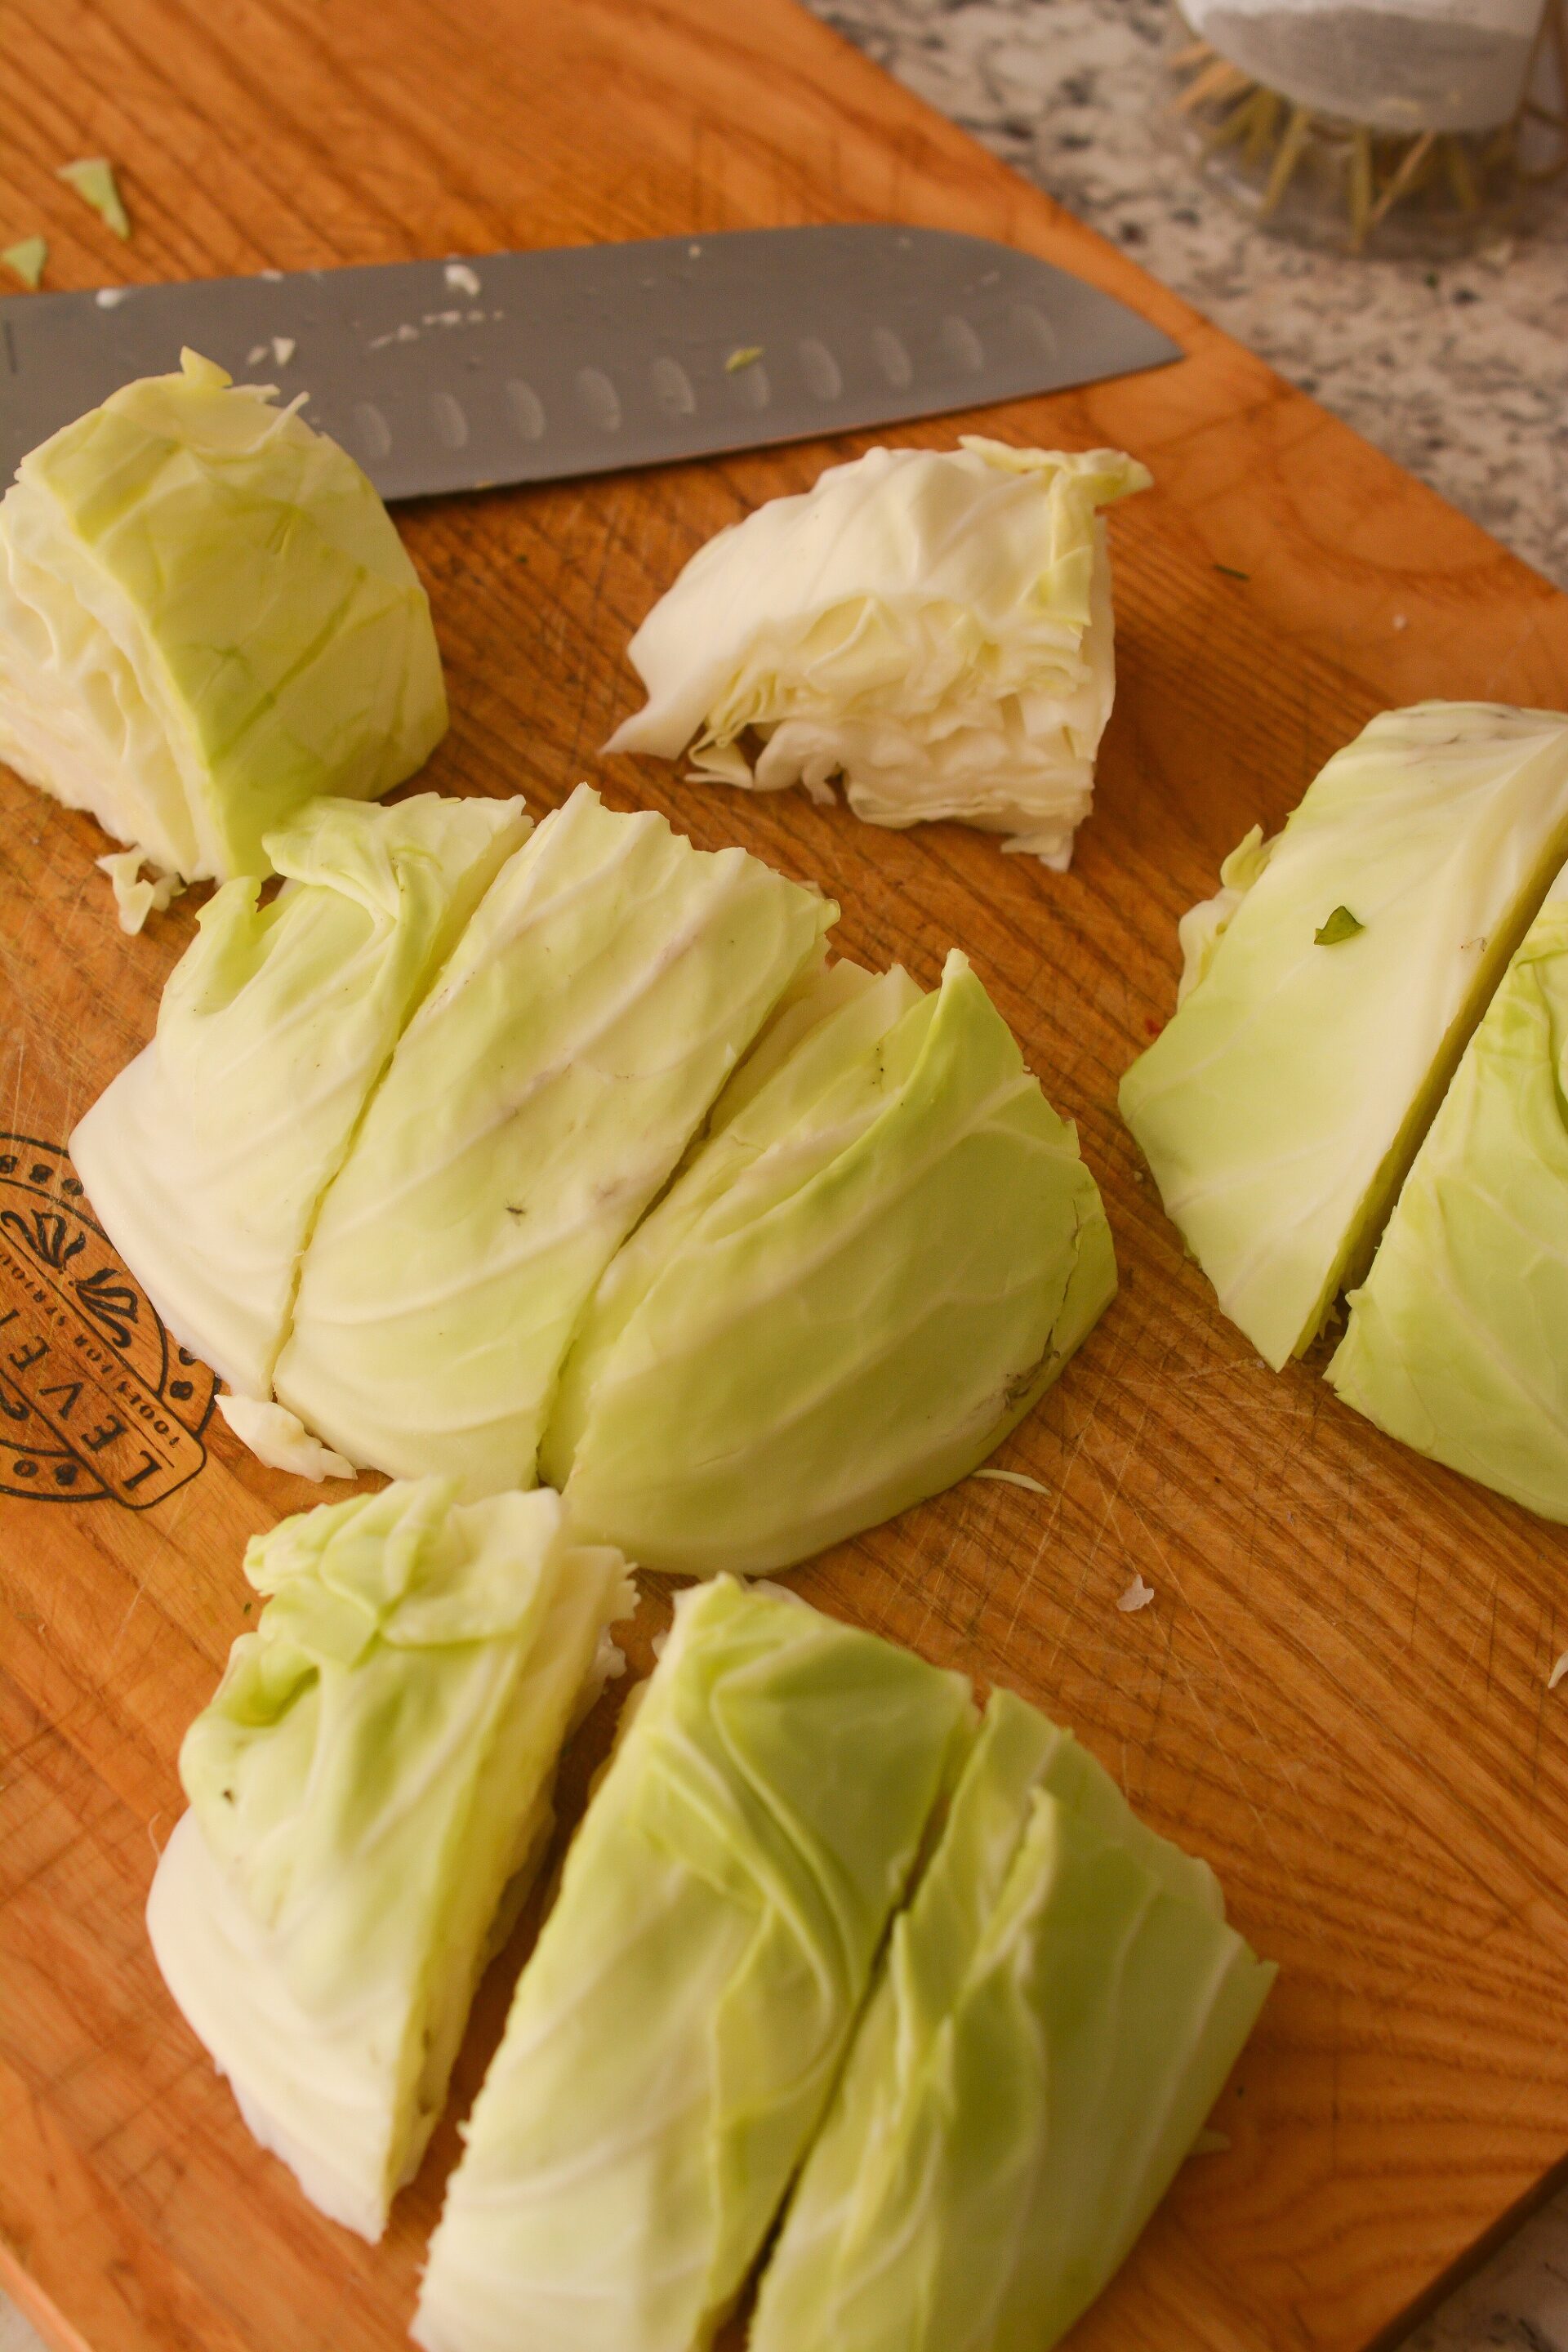 Sliced cabbage wedges on a table.